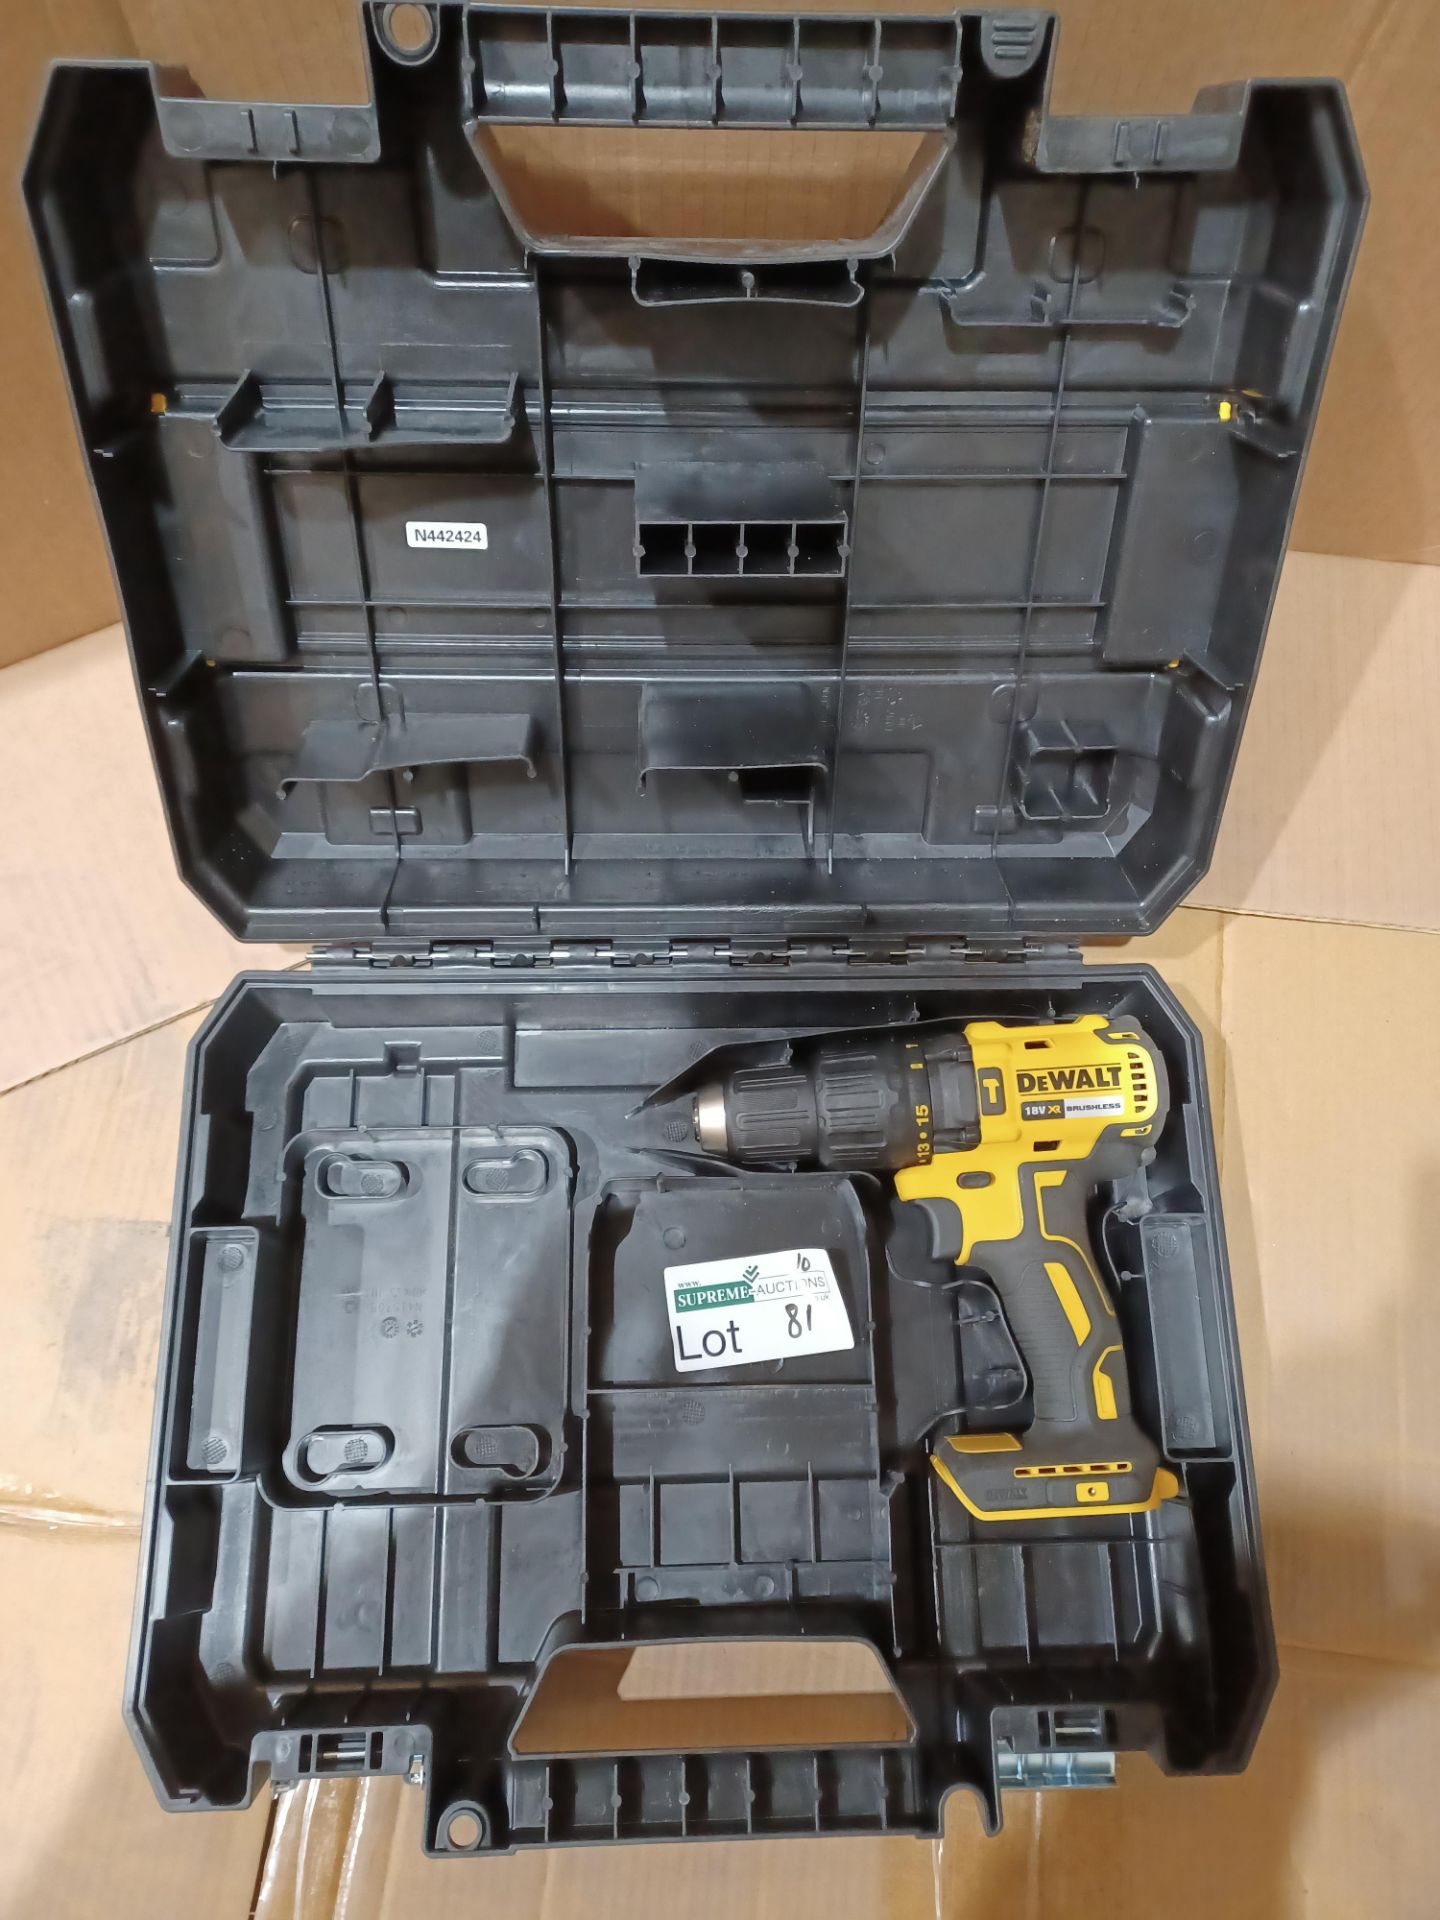 DEWALT DCD778D2T-SFGB 18V 2.0AH LI-ION XR BRUSHLESS CORDLESS COMBI DRILL  WITH CARRY CASE UNCHECK